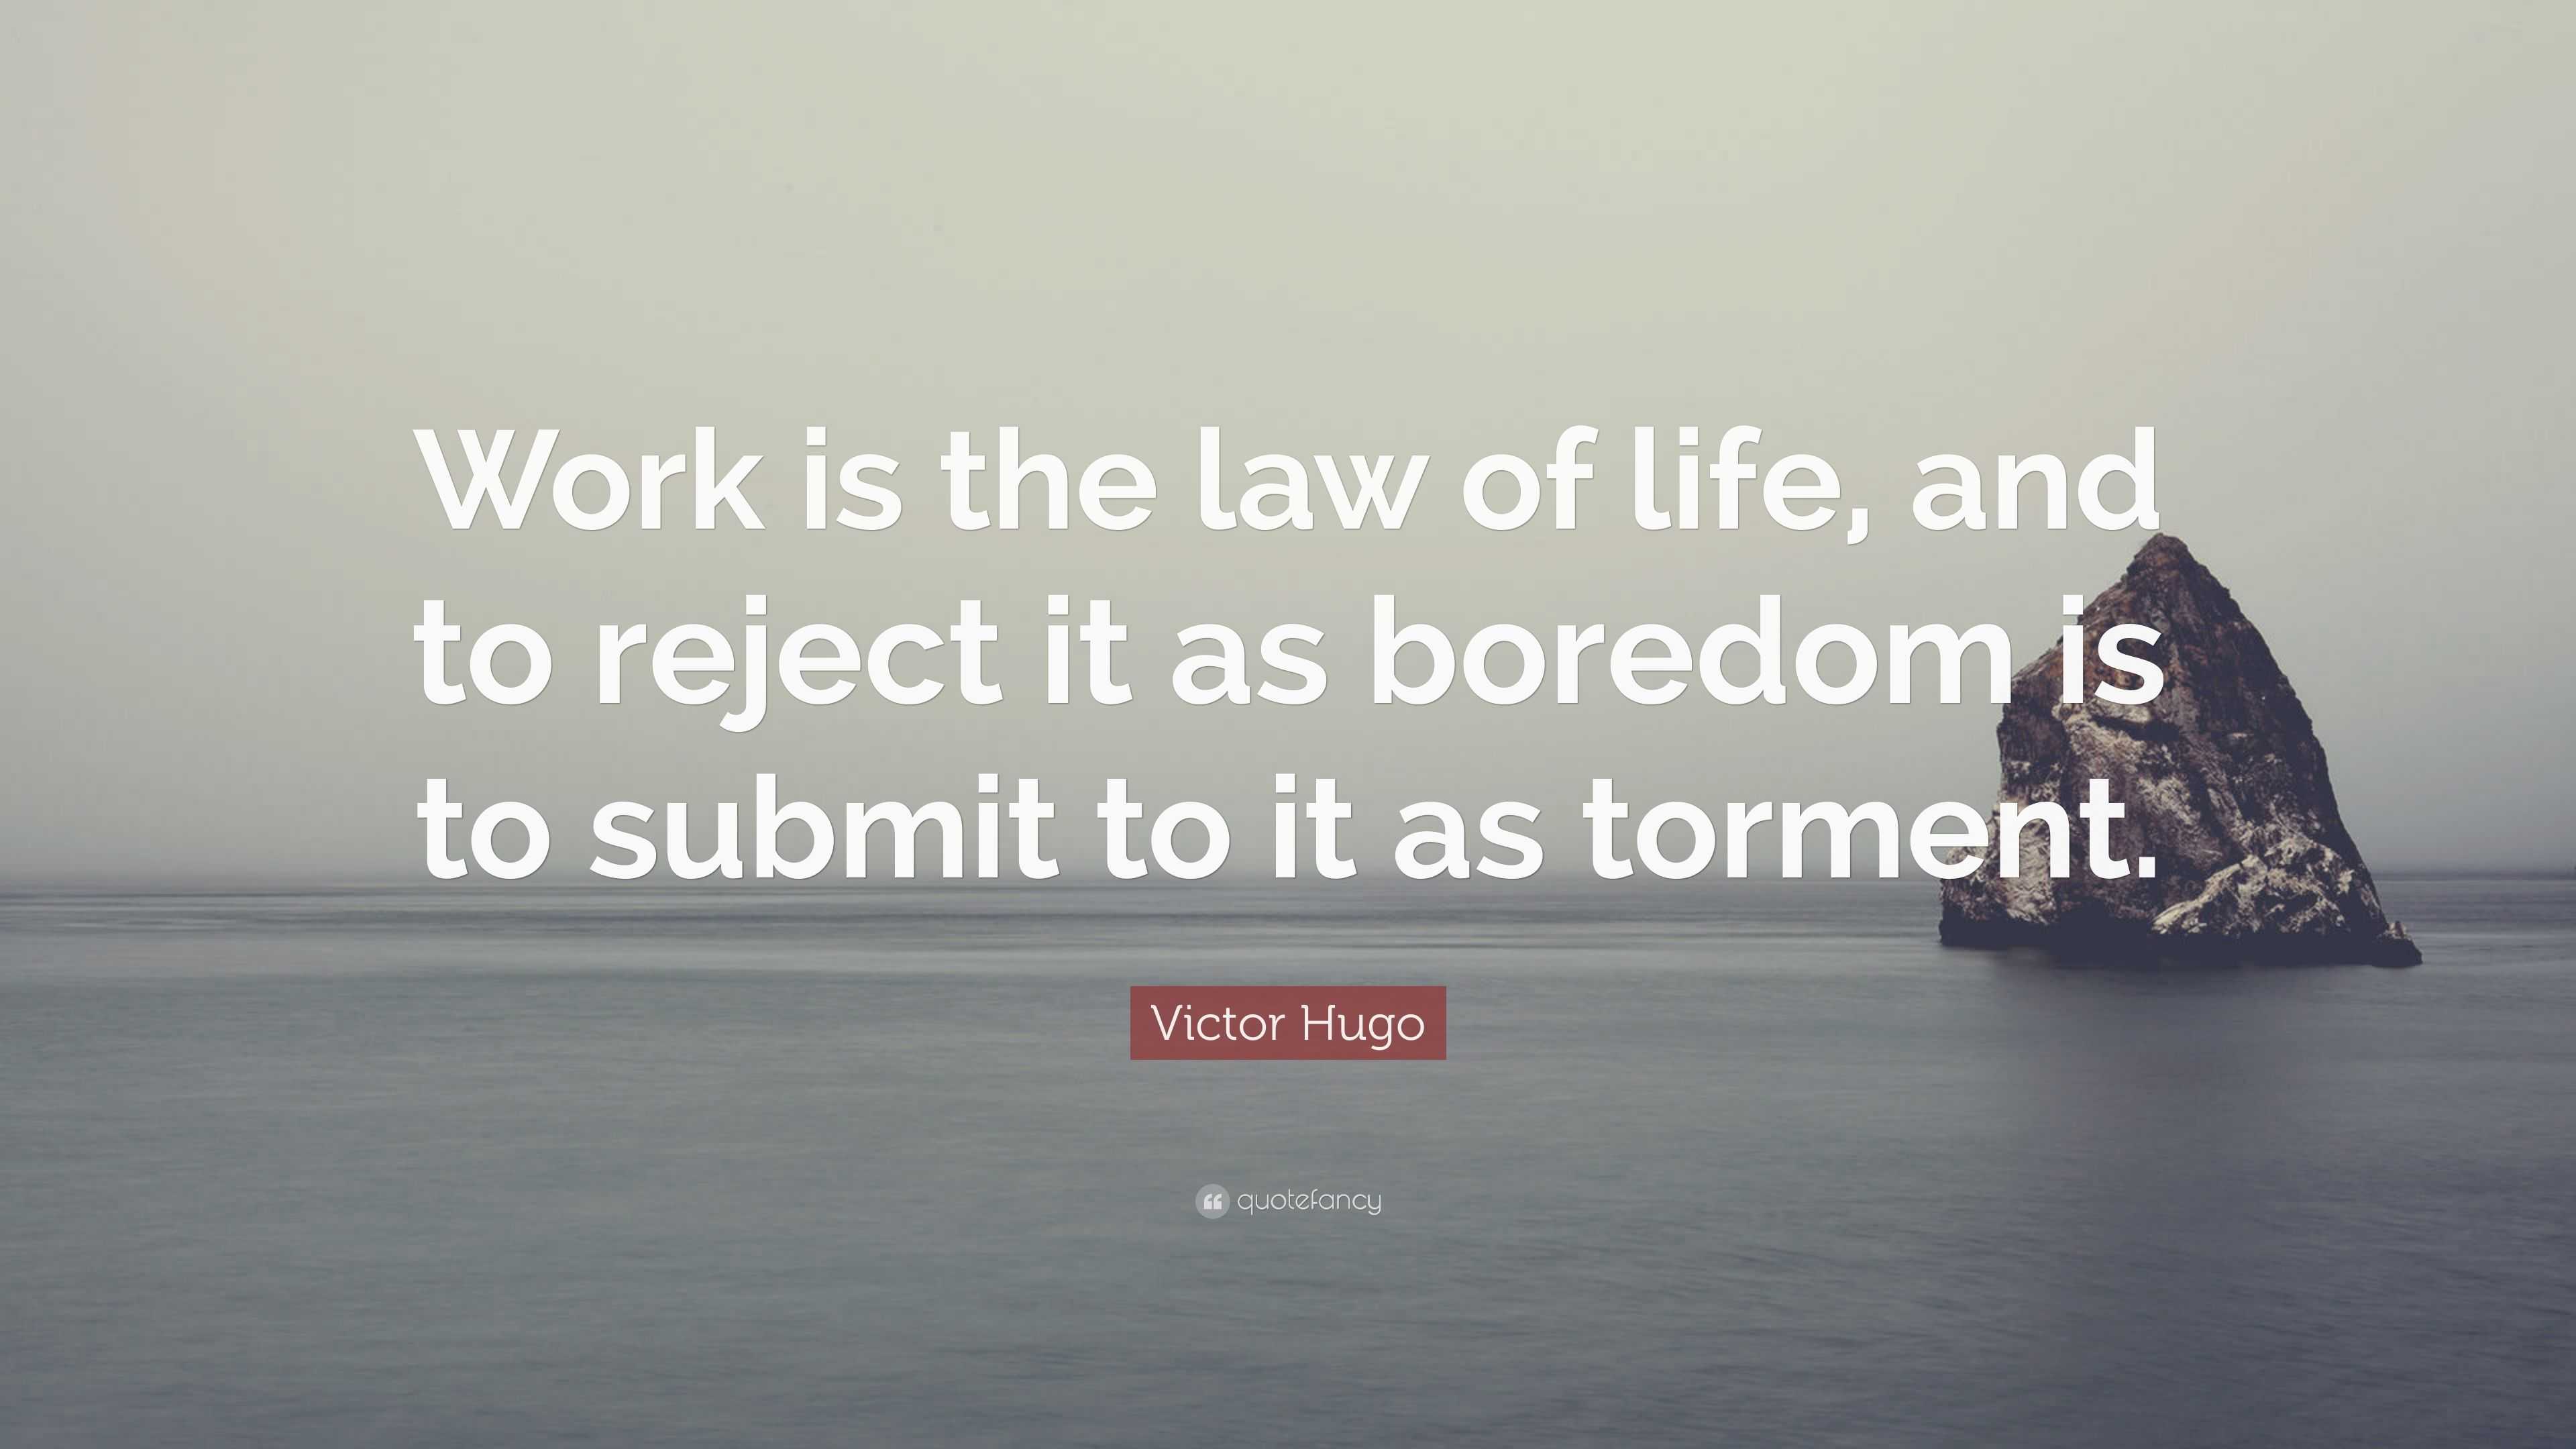 law of life quotes victor hugo quote u201cwork is the law of life and to reject